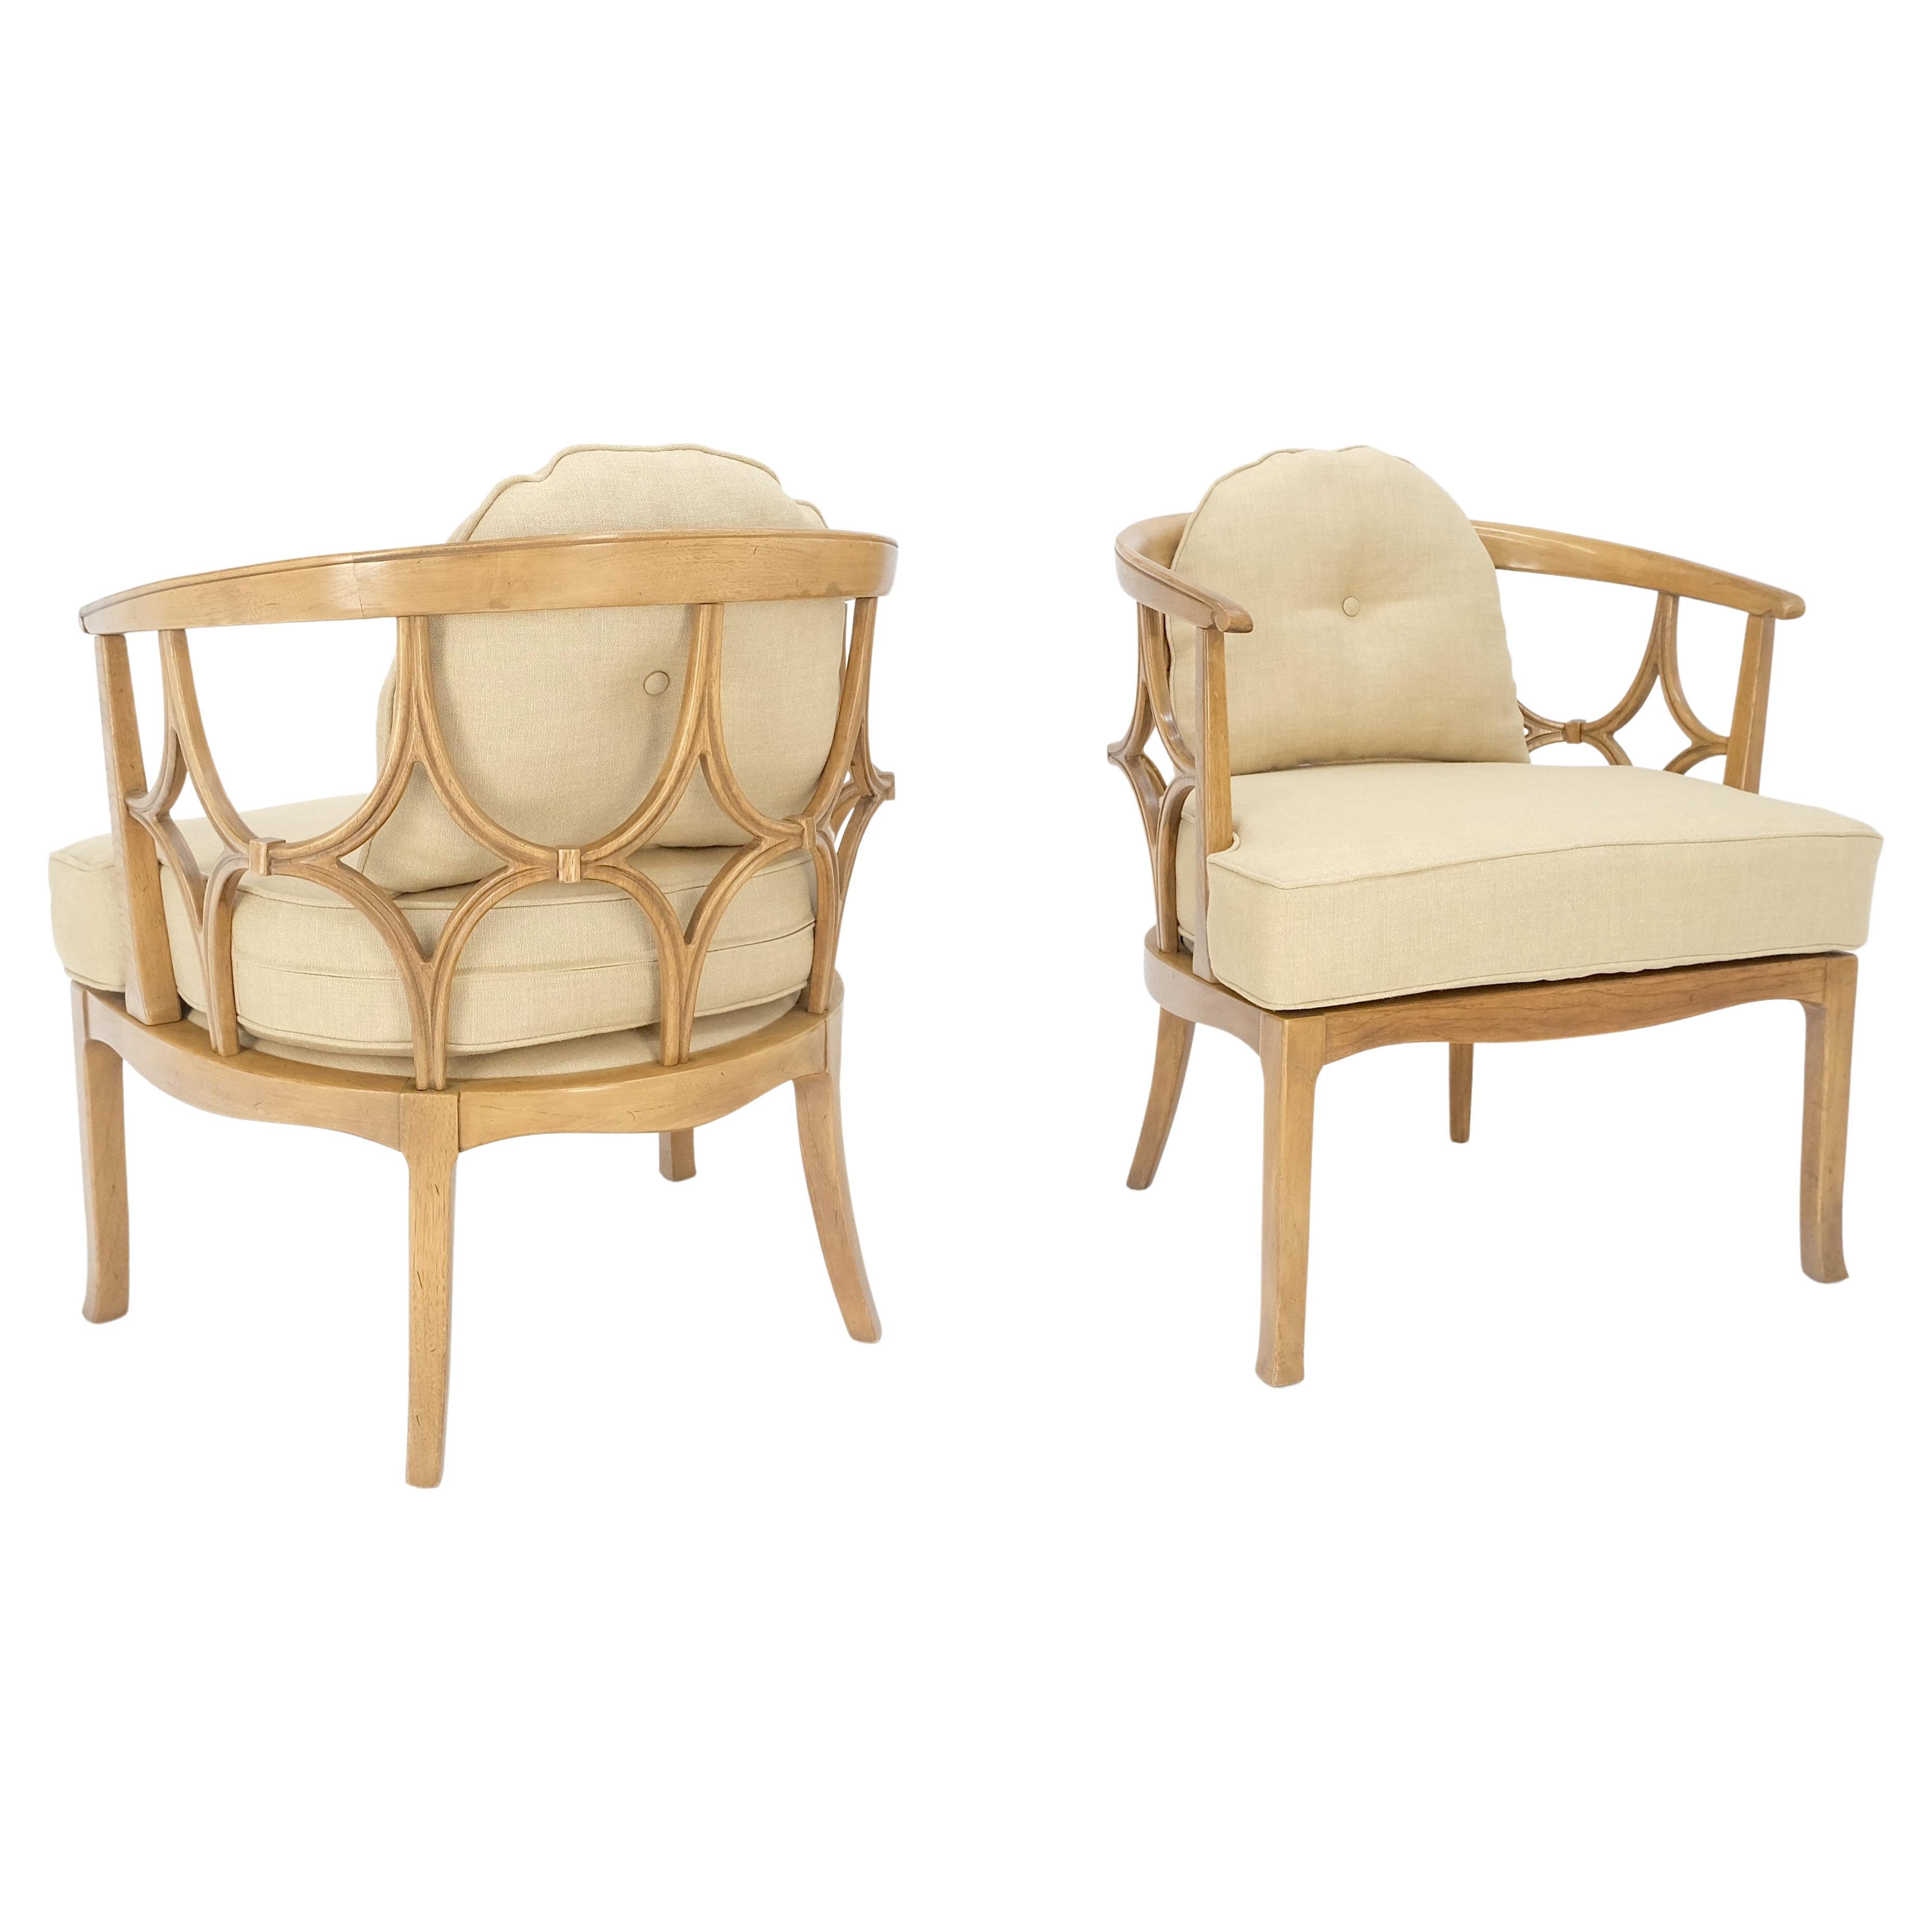 Pair of New Gold Linen Upholstery Barrel Back Wrap Around Lounge Arm Chairs MINT For Sale